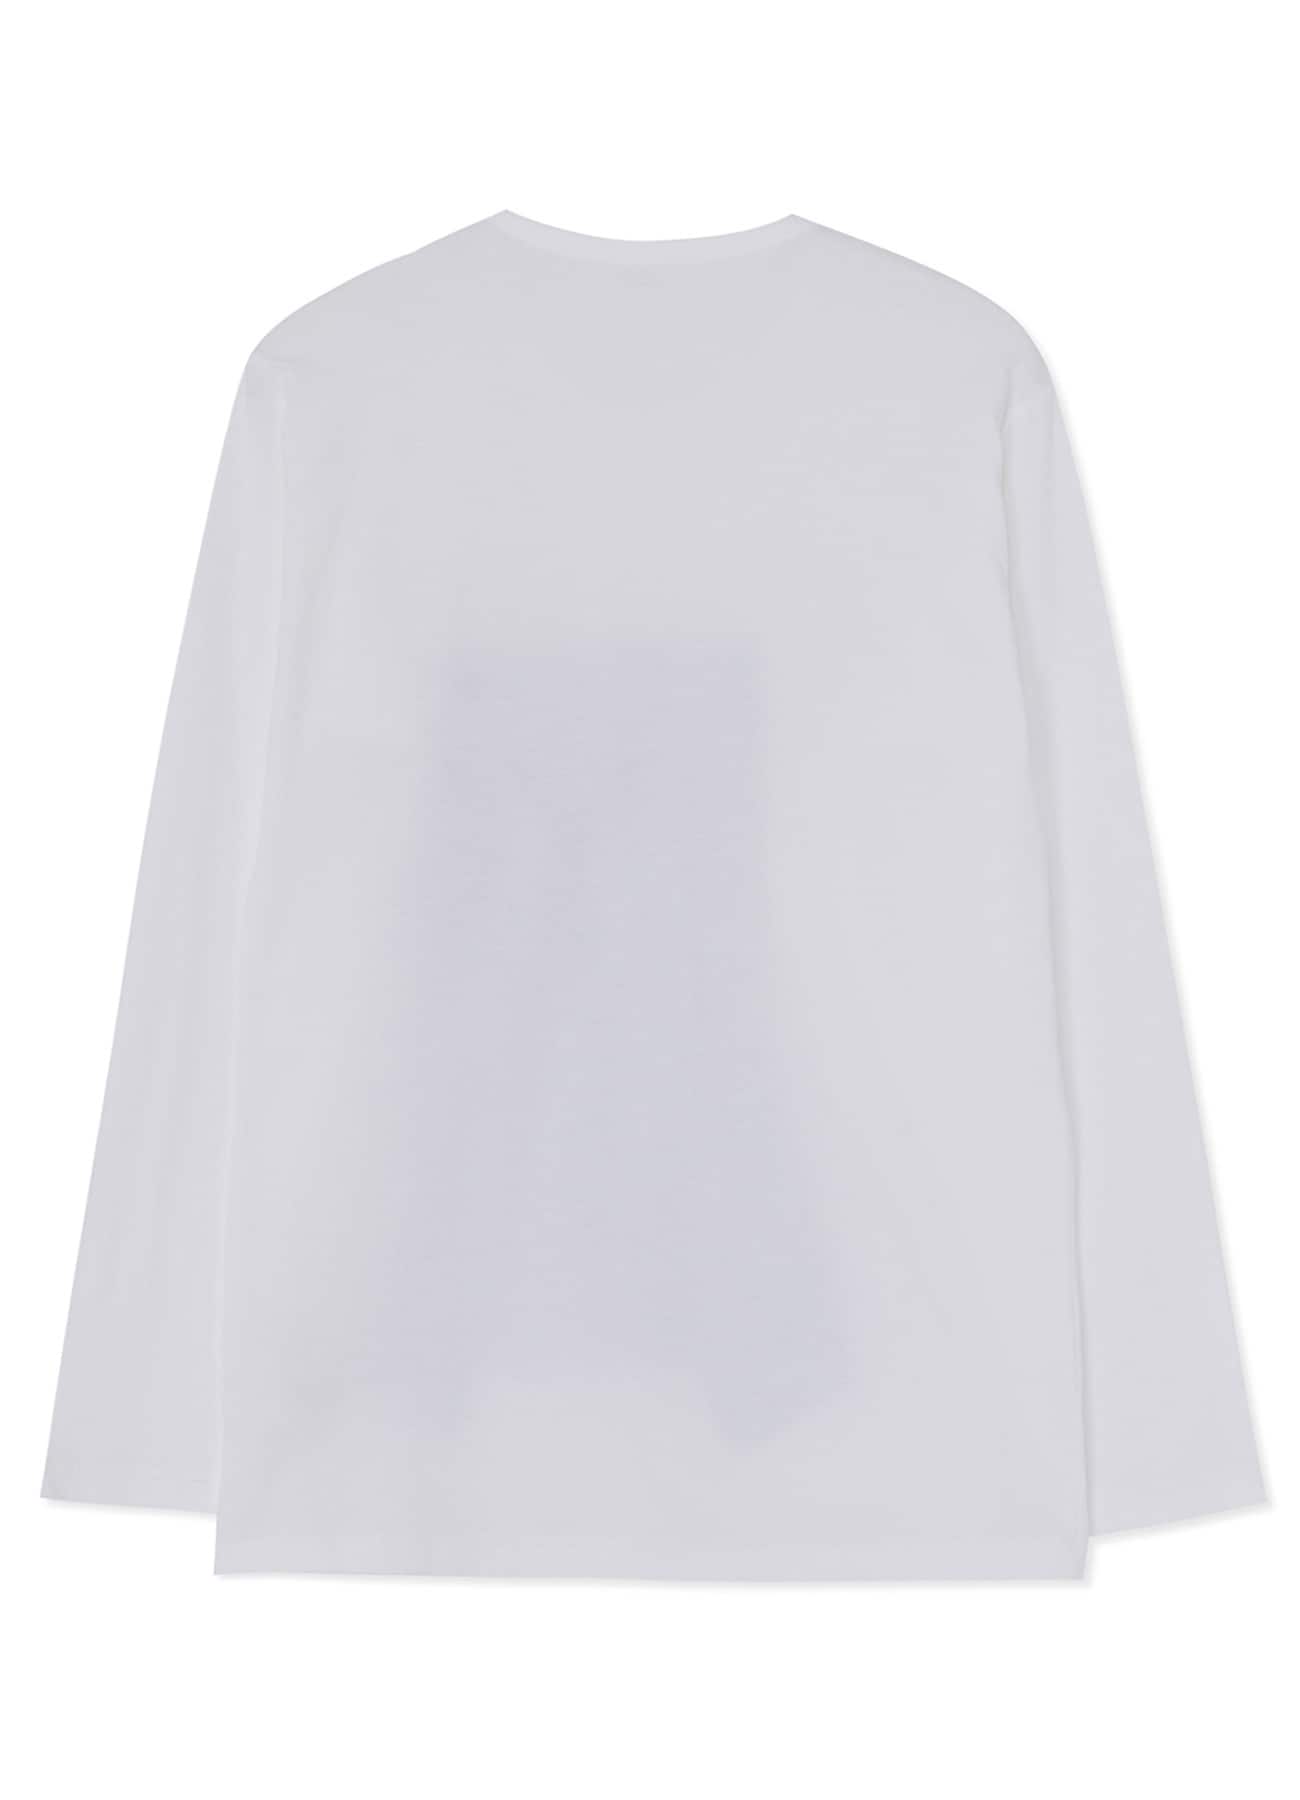 PLAIN STITCH x GEORGETTE Y's PATCH-WORKED LONG SLEEVES T(S Off